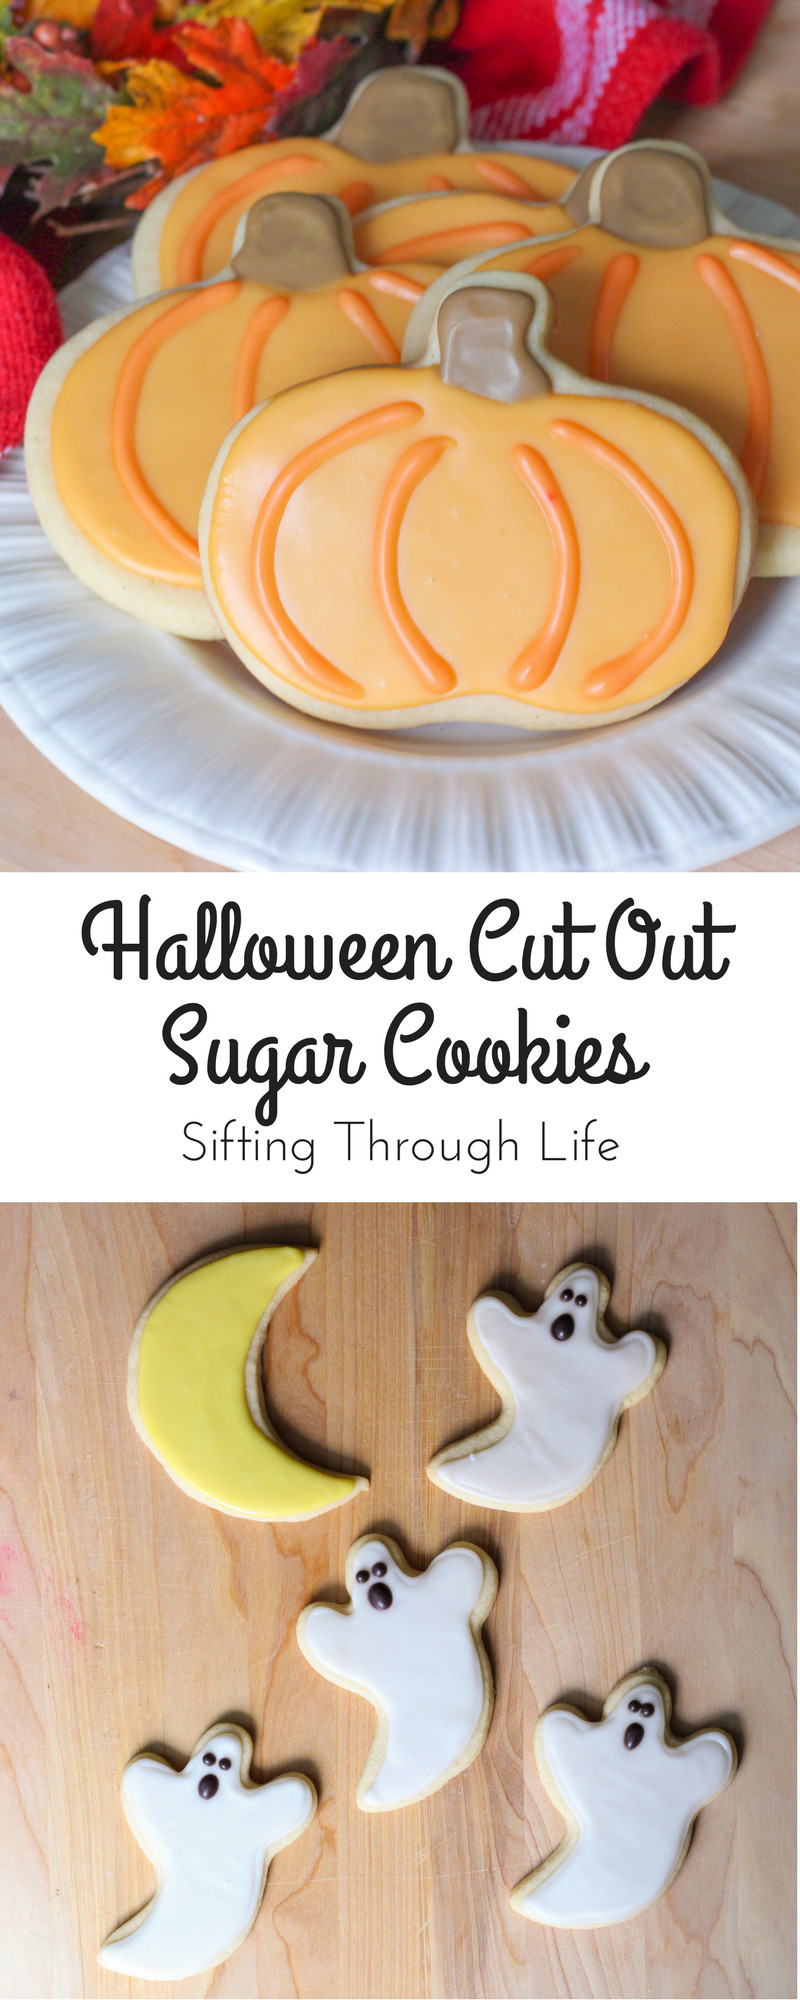 Halloween Cut Out Cookies
 Halloween Cut Out Sugar Cookies